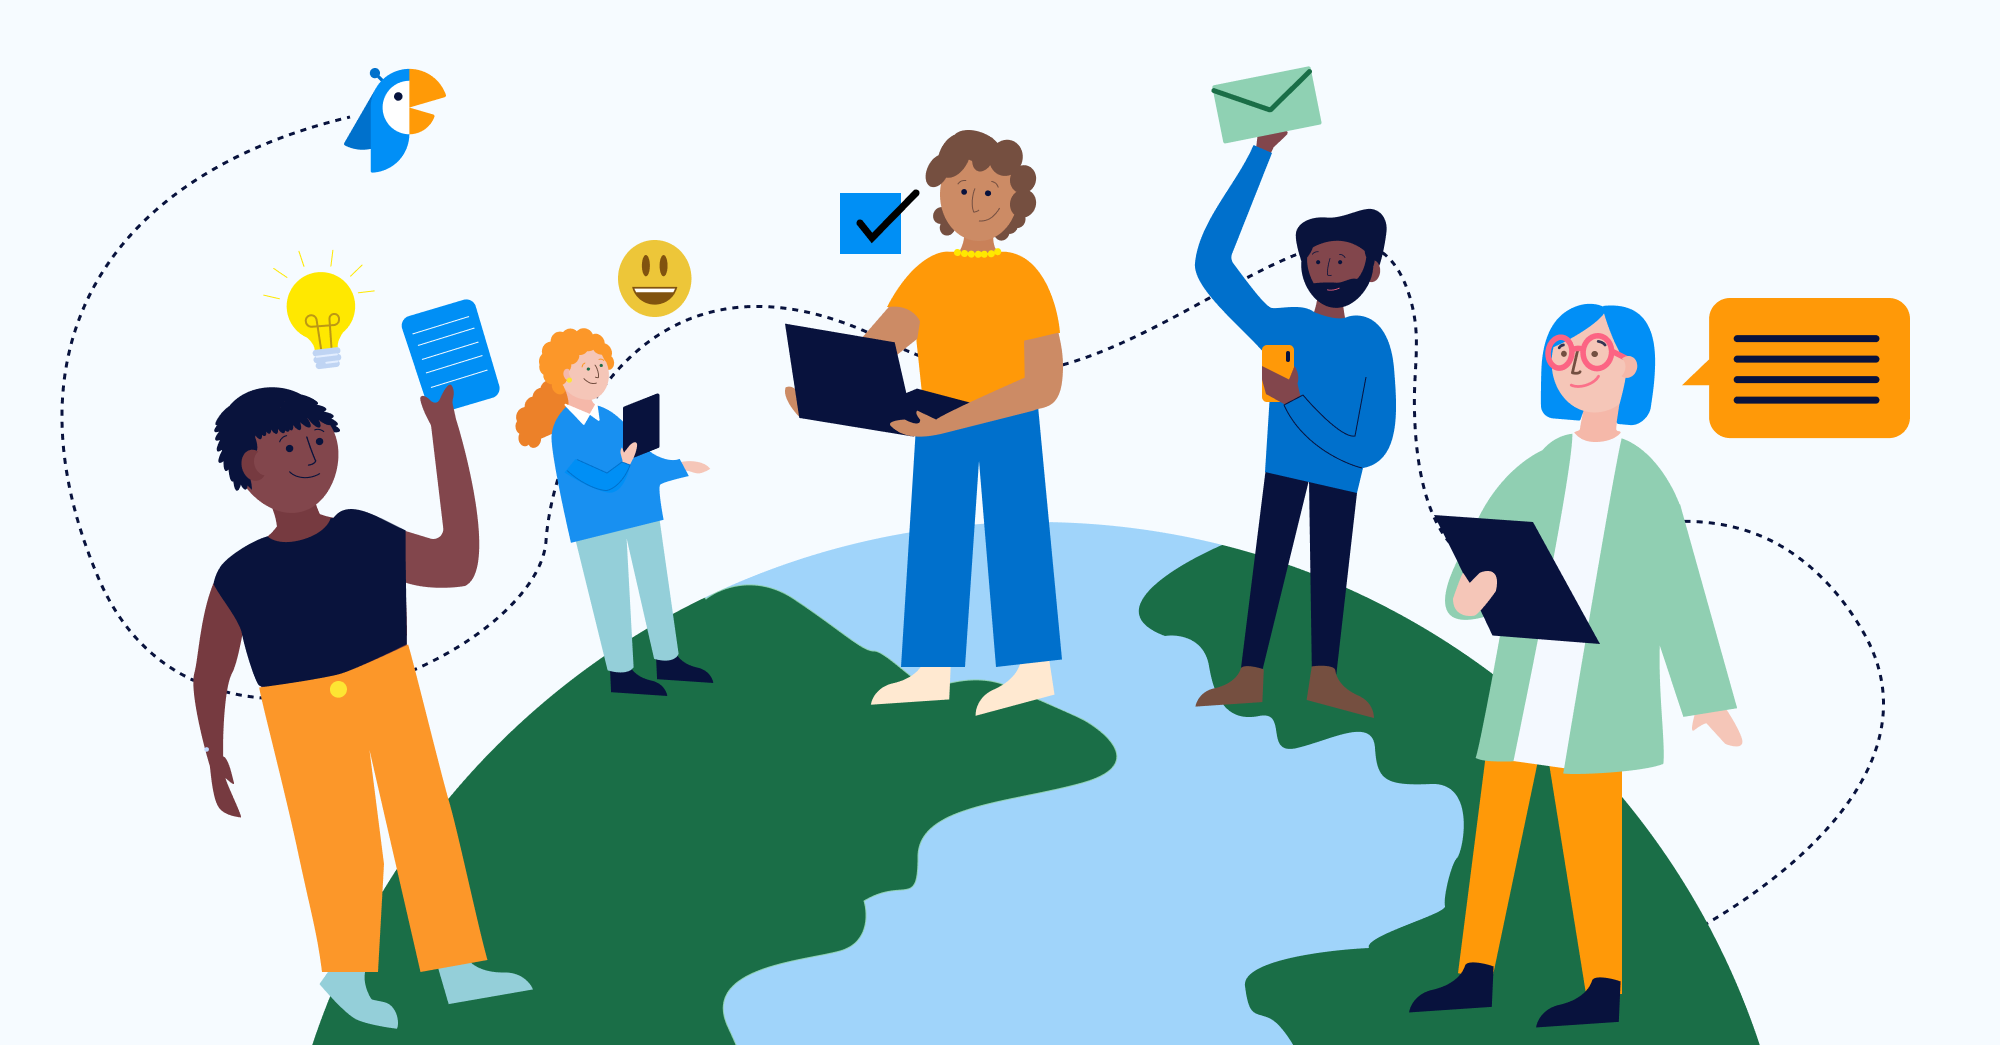 Managing remote teams: people in different parts of the world